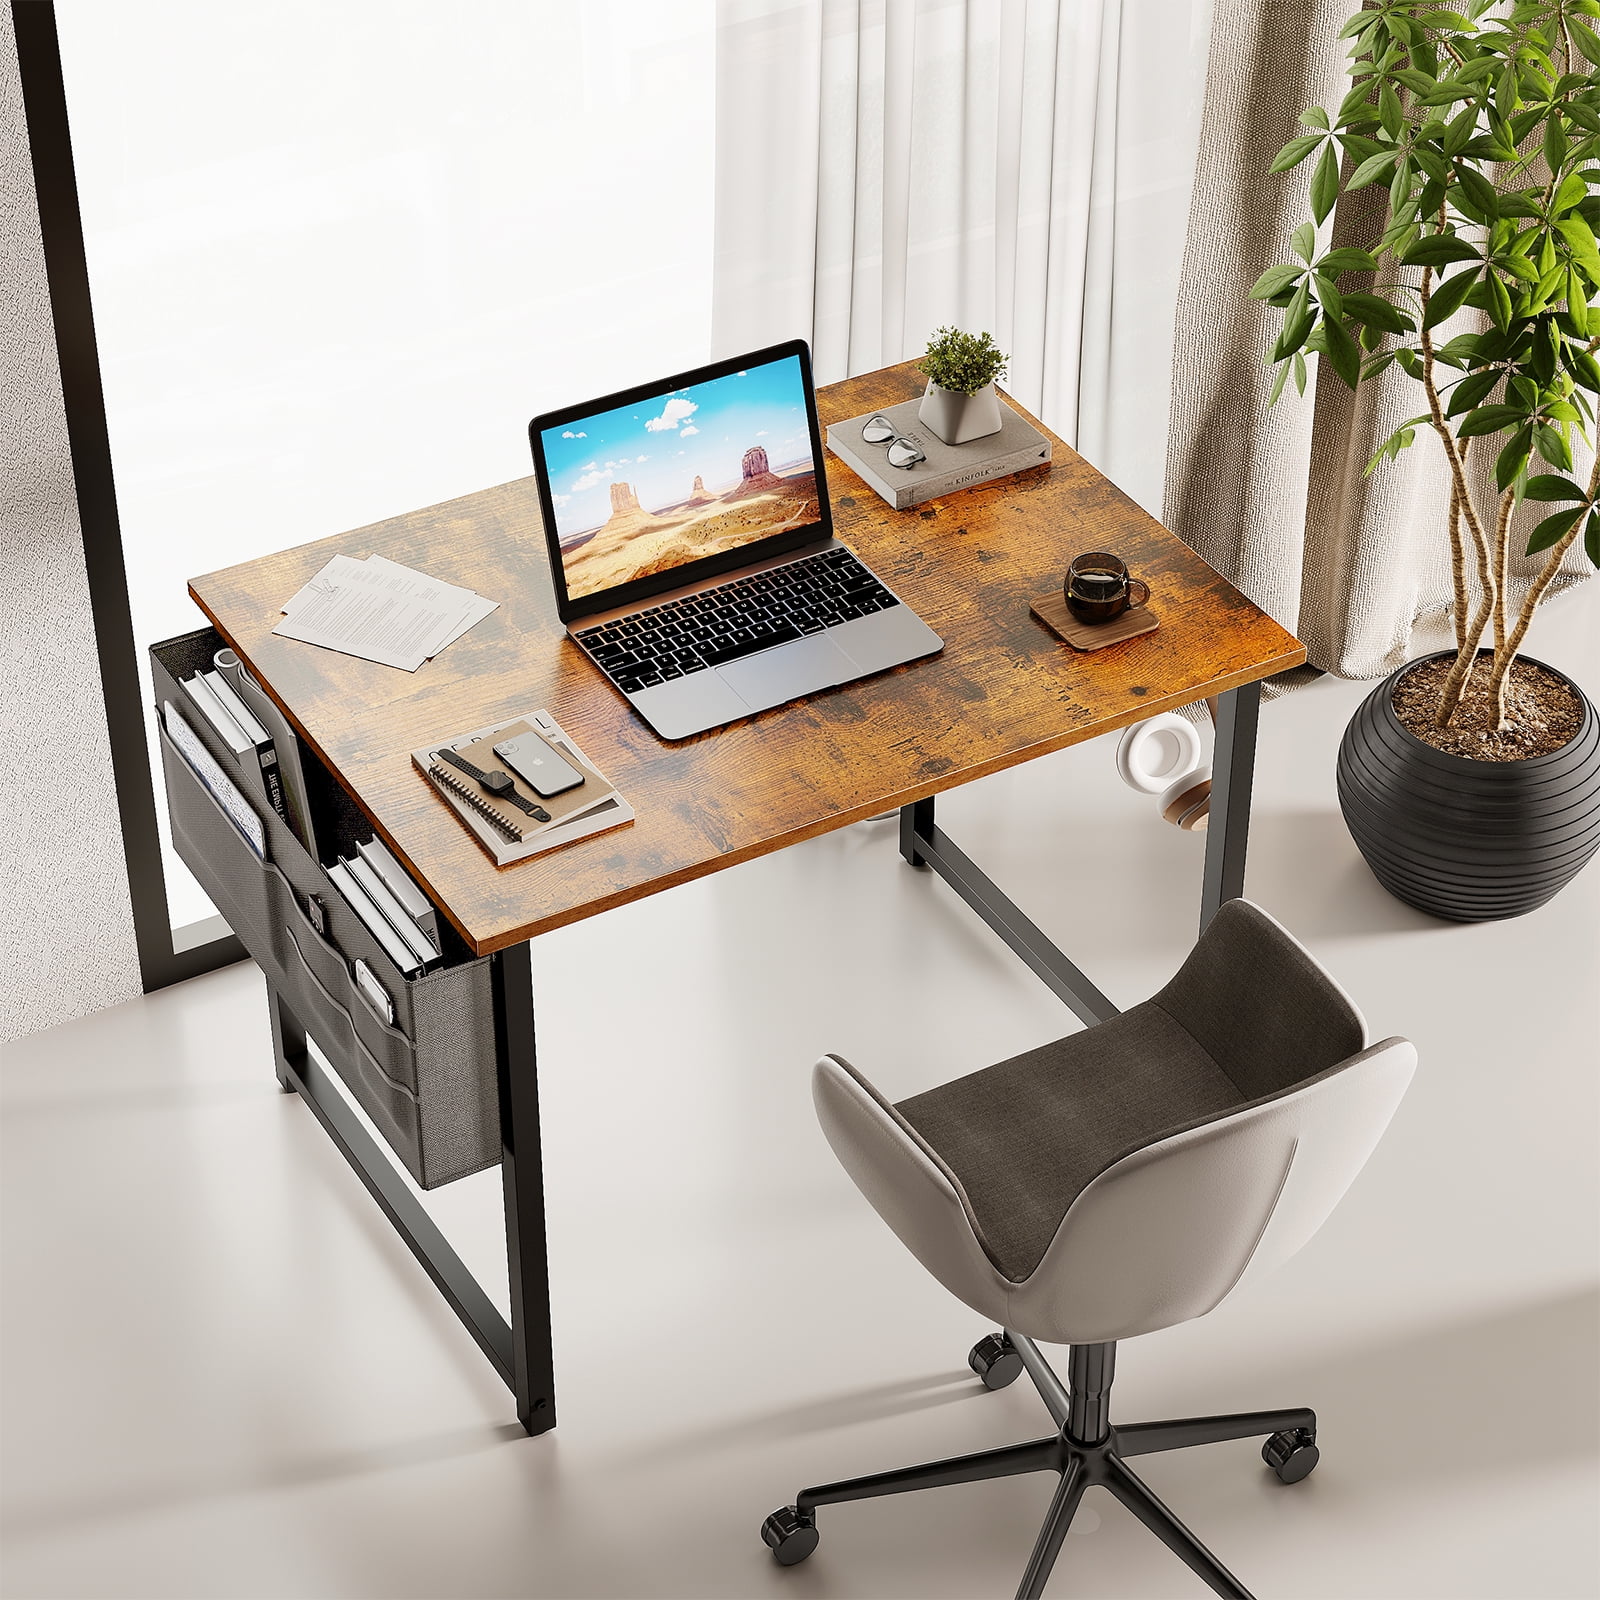 Computer Writing Desk, School Student Desk, Home Office Desk For Small  Space, Study Kids Desk With Headphone Hook 